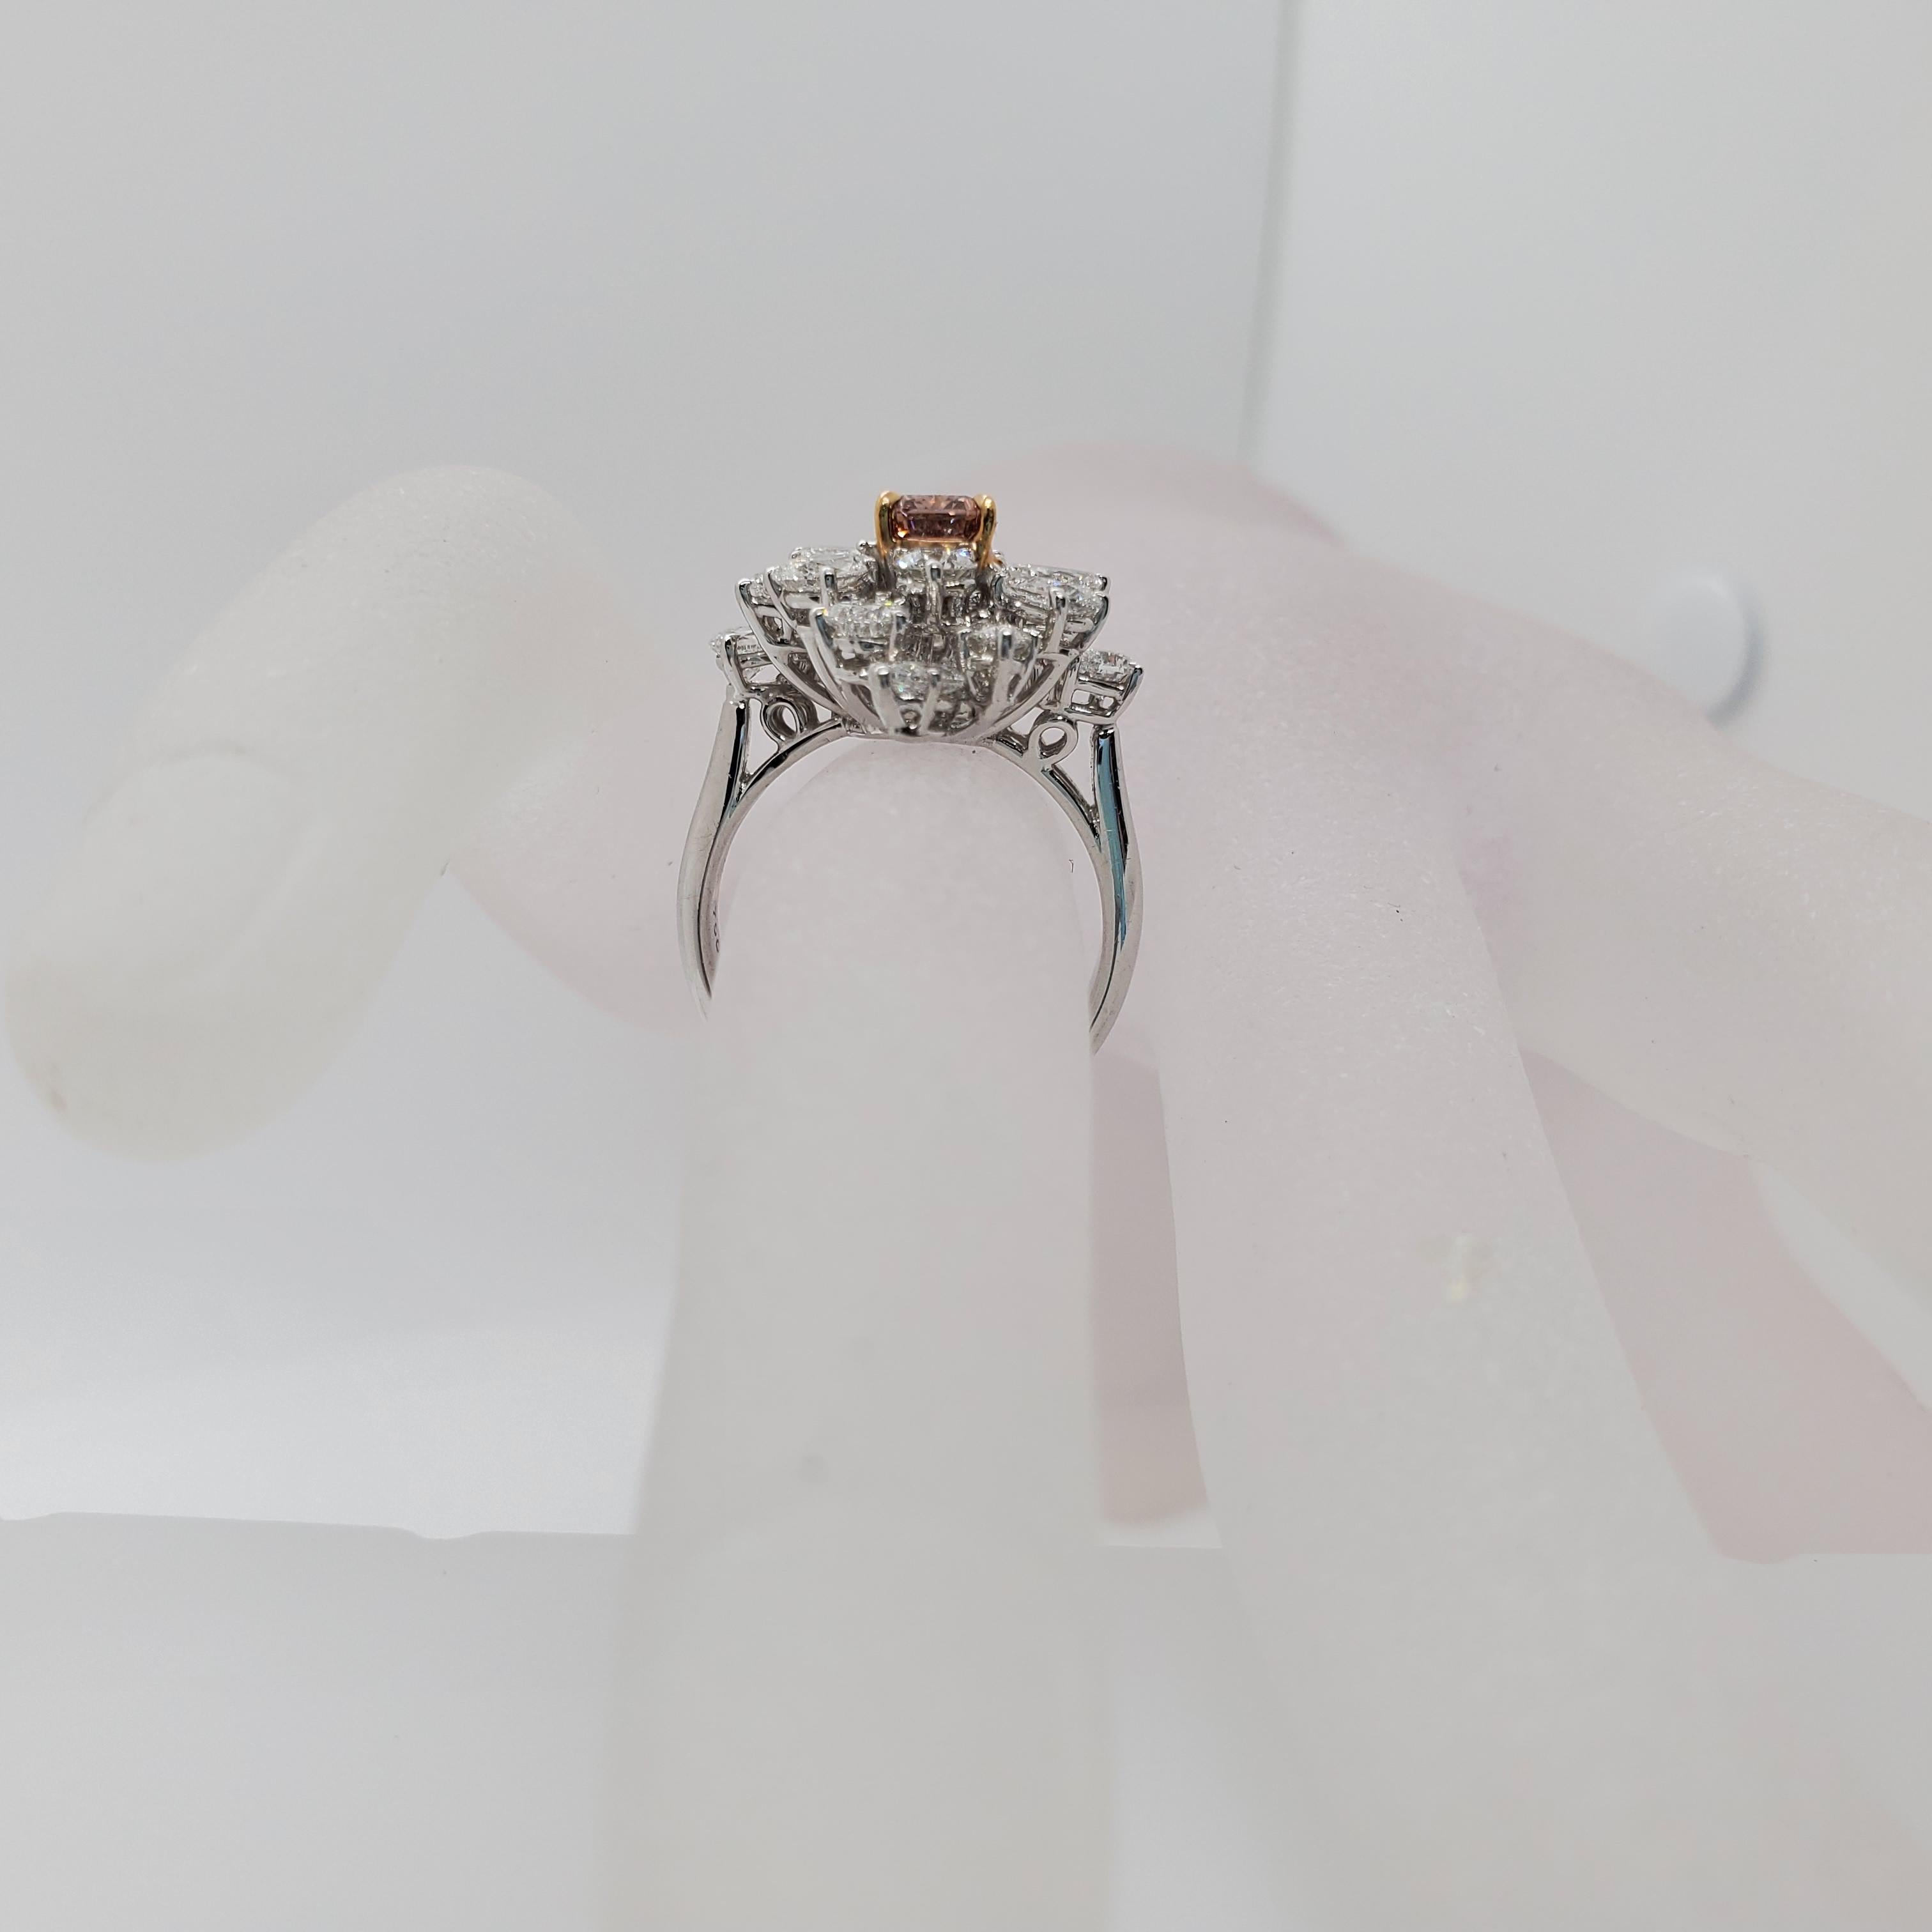 Fancy Deep Brown Pink Radiant Diamond and White Diamond Ring in Platinum and 18k 2